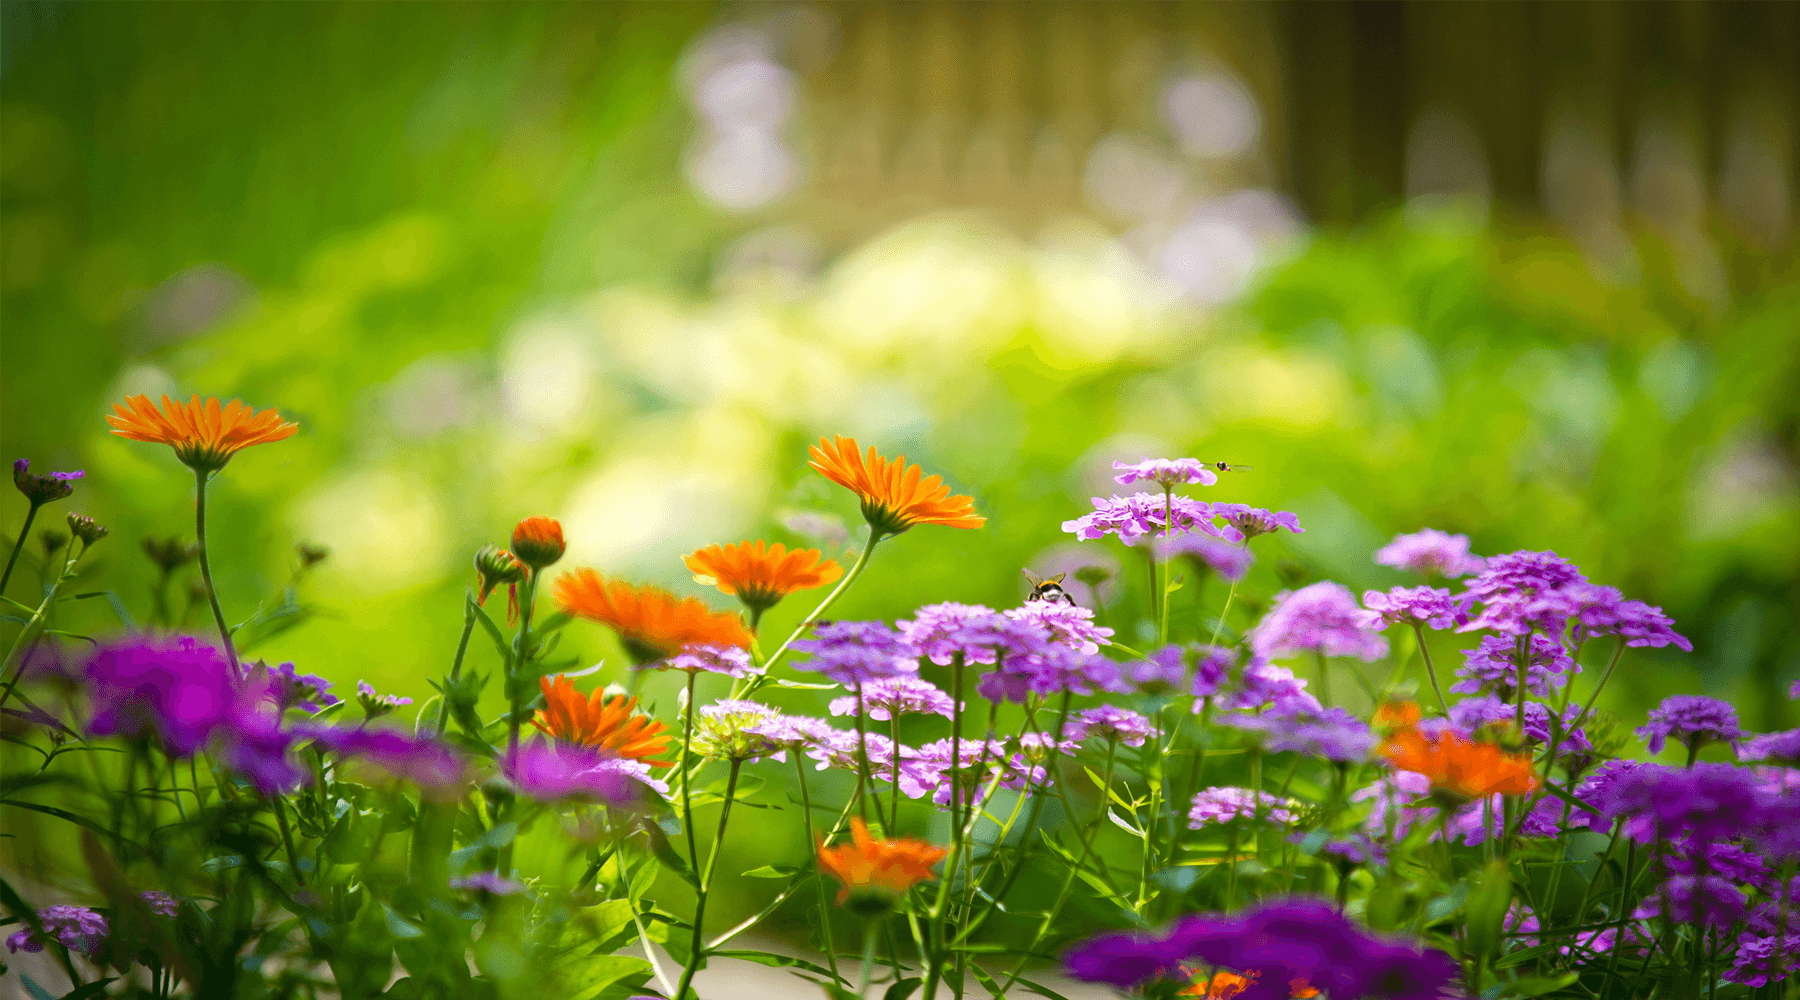 How to Prolong Your Gardens Flowers & Plants This Summer